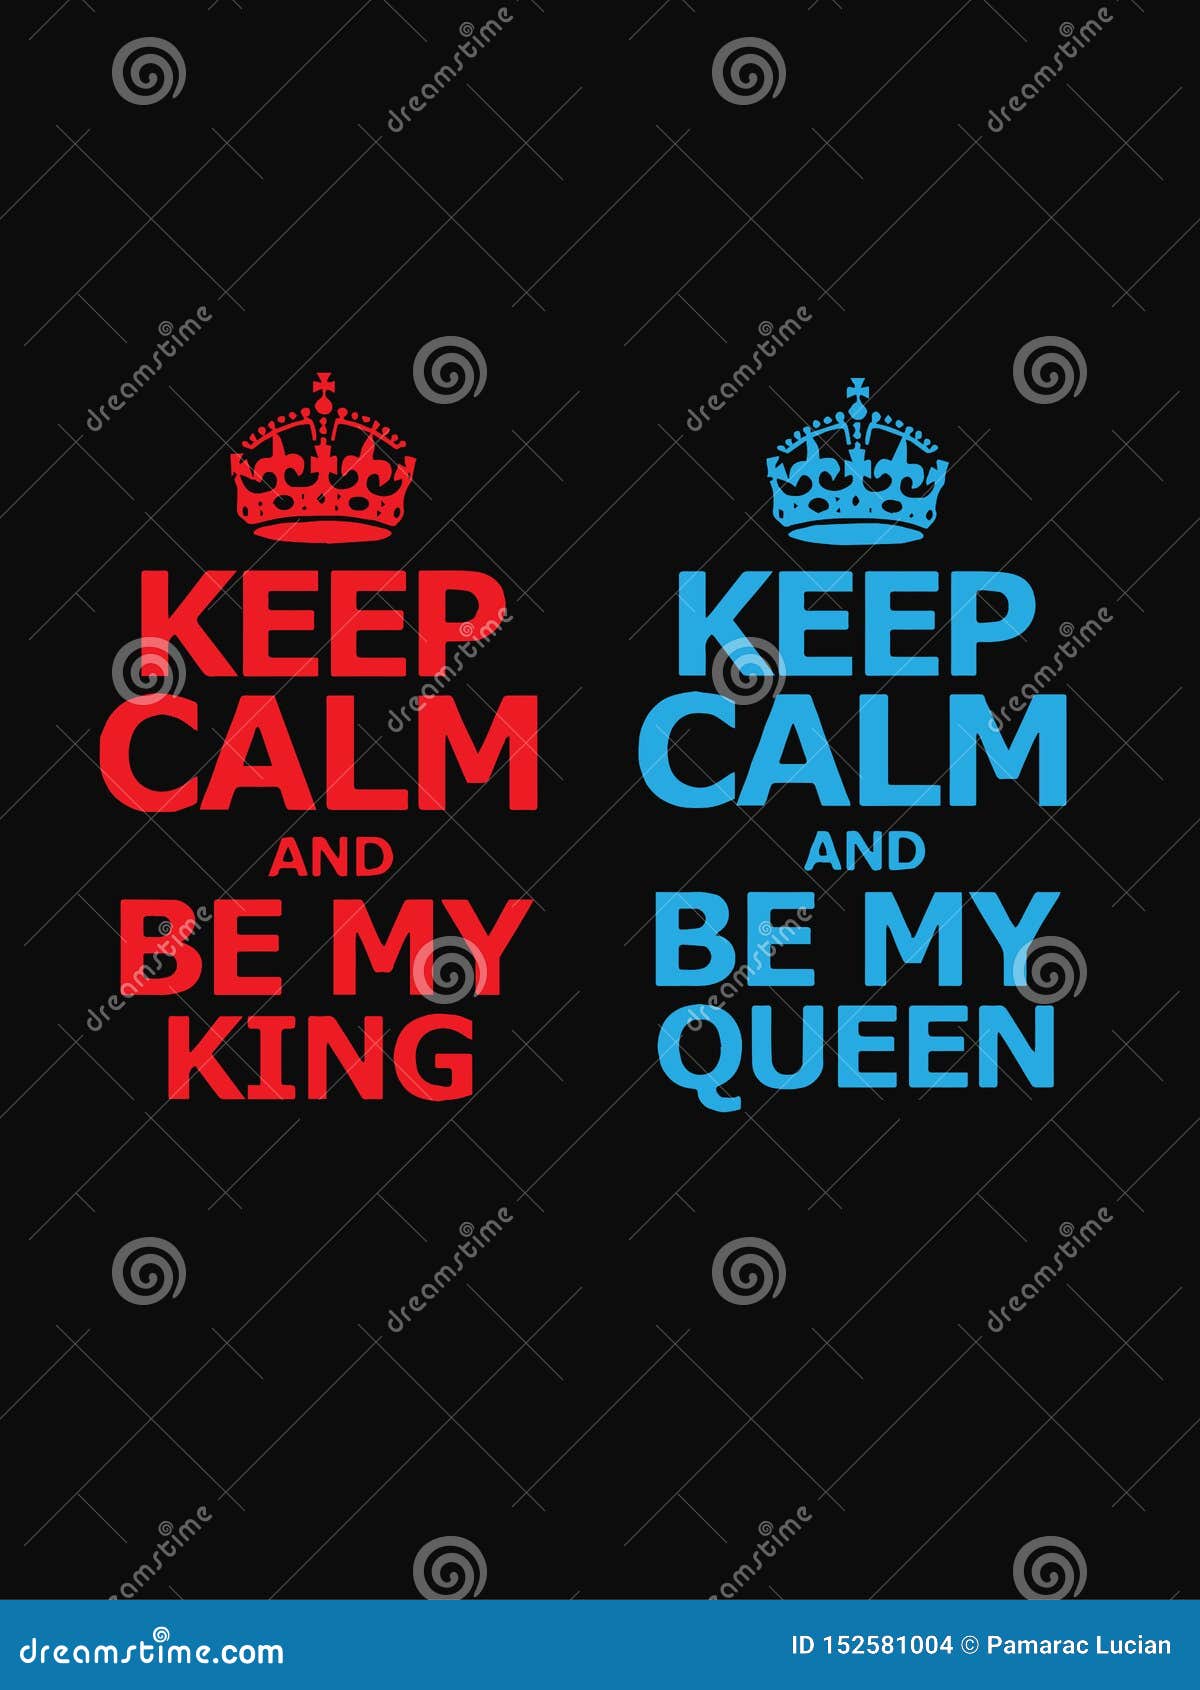 Keep Calm and Be My King/queen Text Isolated on Black   Design Stock Vector - Illustration of metal, isolated: 152581004